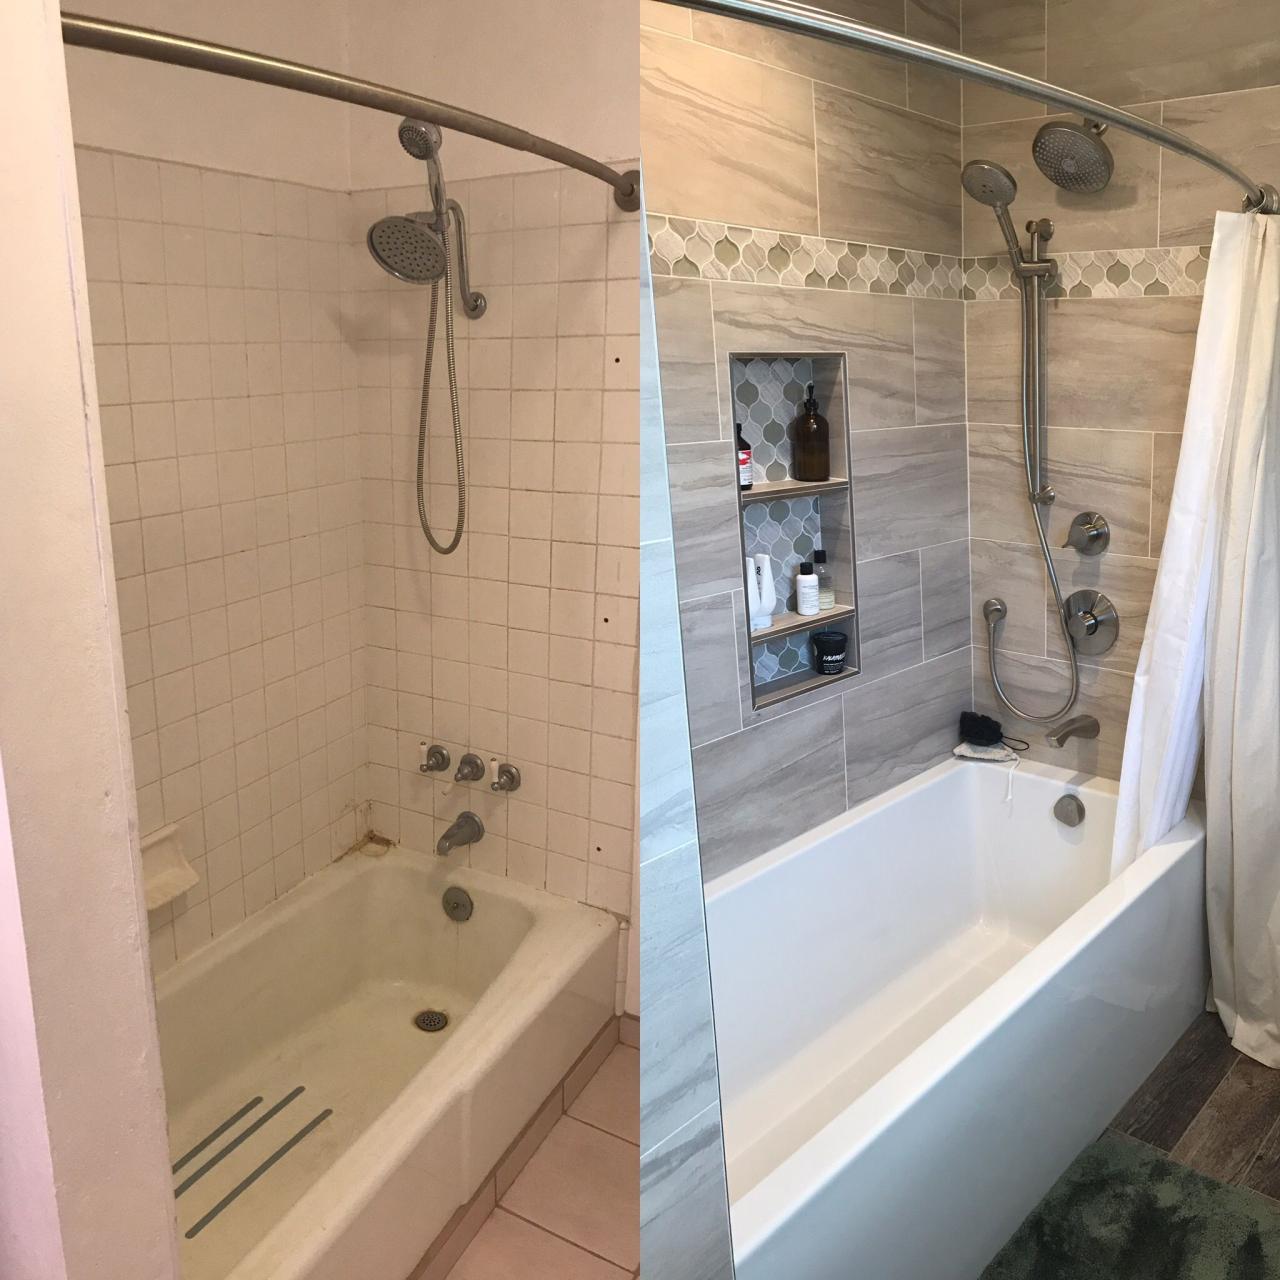 Upstairs bathroom remodel before and after 2018 Bathrooms remodel